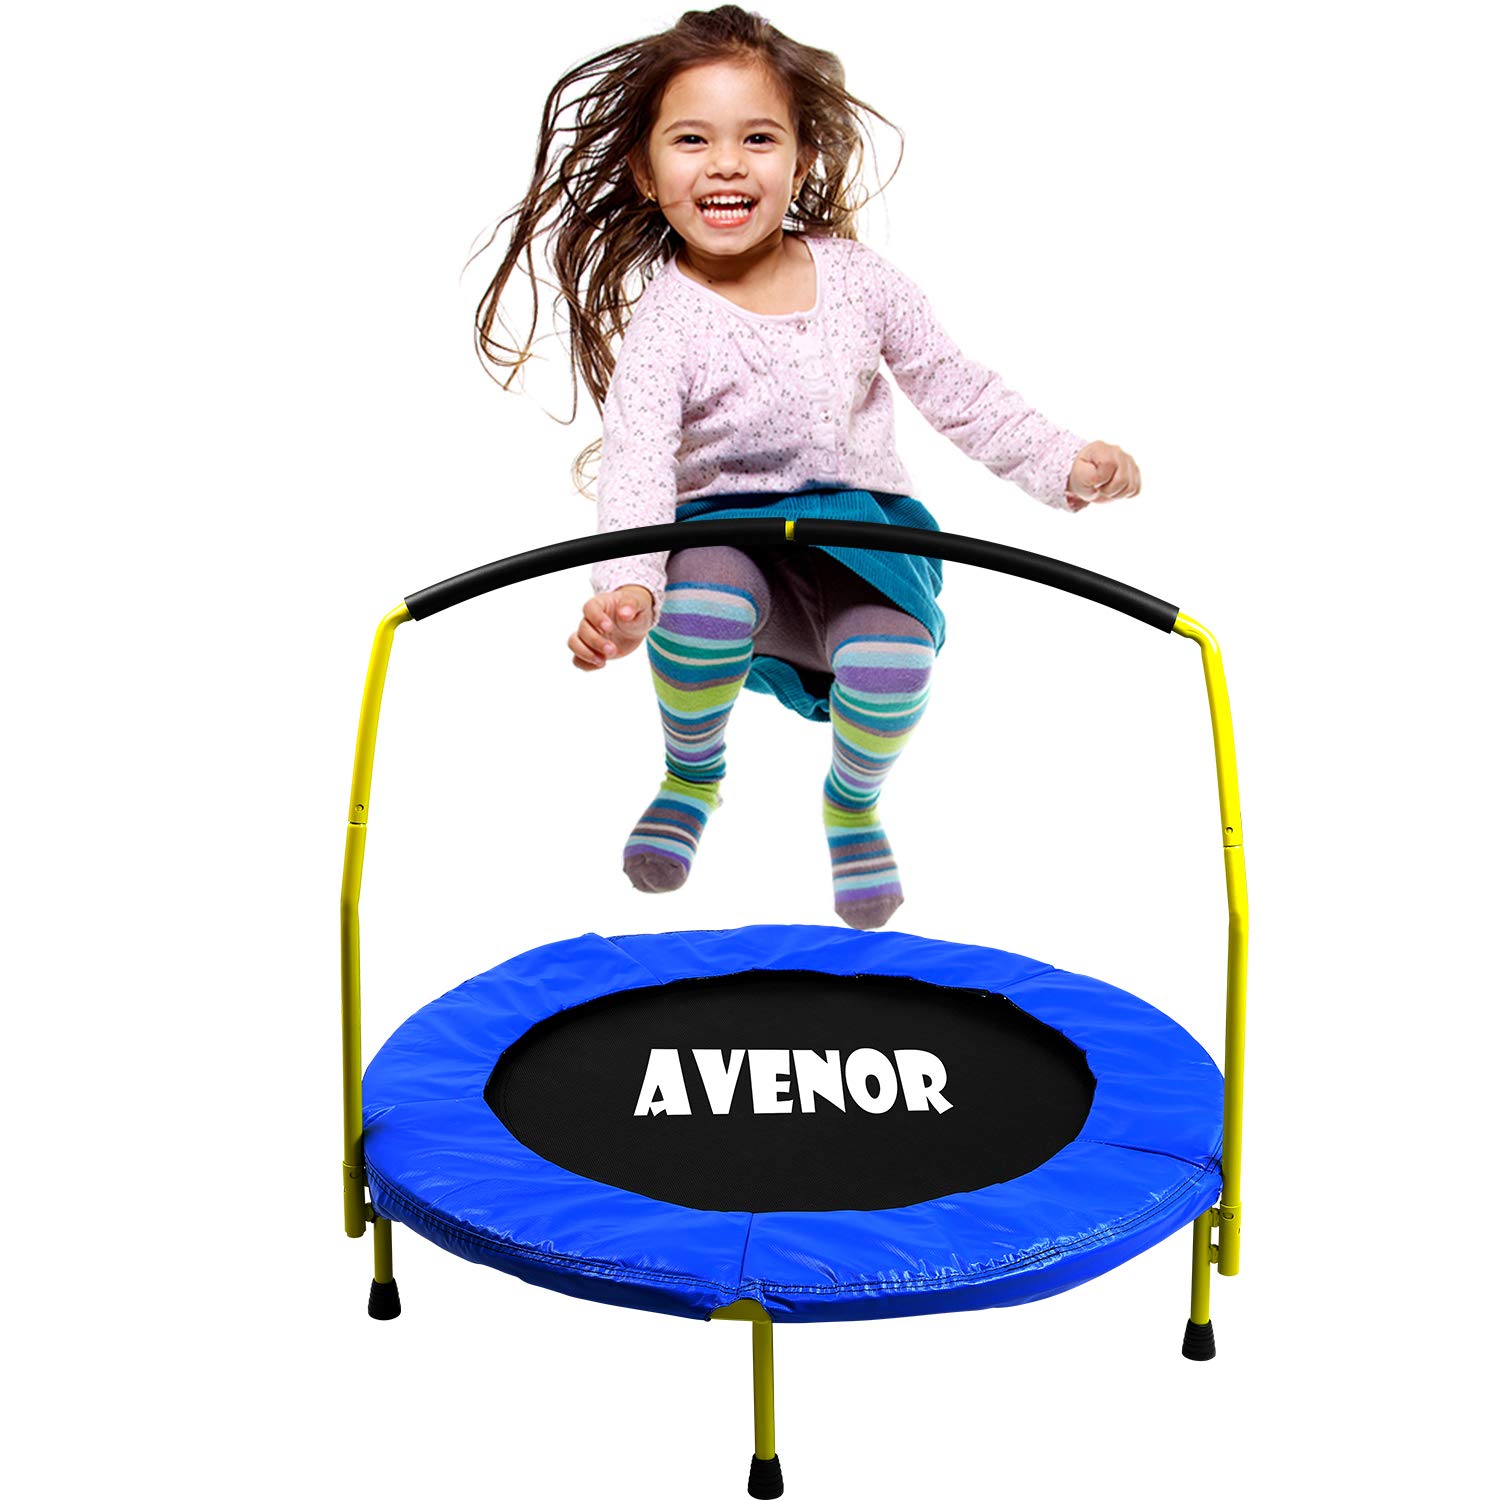 Toddler Trampoline With Handle - 36" Kids Trampoline With Handle